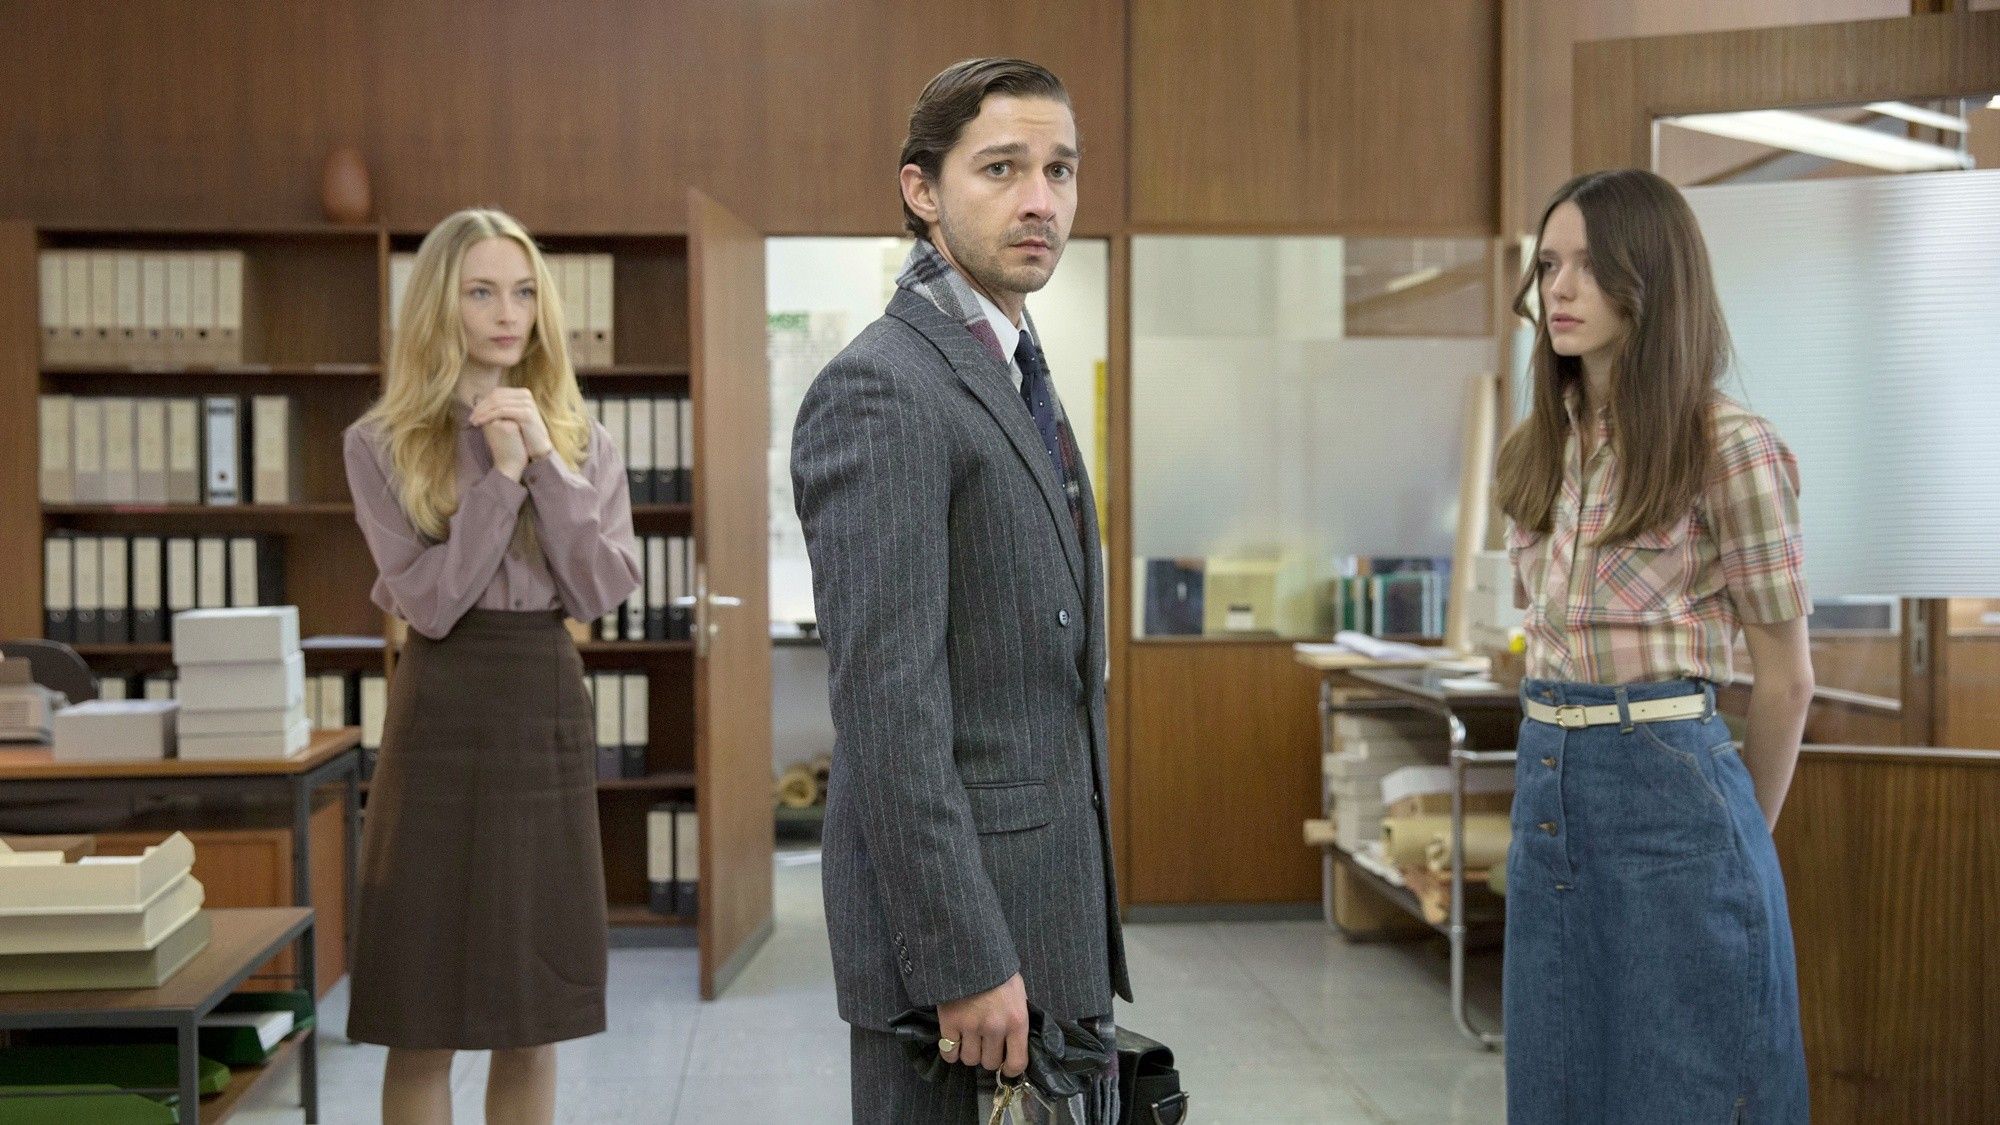 Felicity Gilbert, Shia LaBeouf and Stacy Martin in Magnolia Pictures' Nymphomaniac (2014)